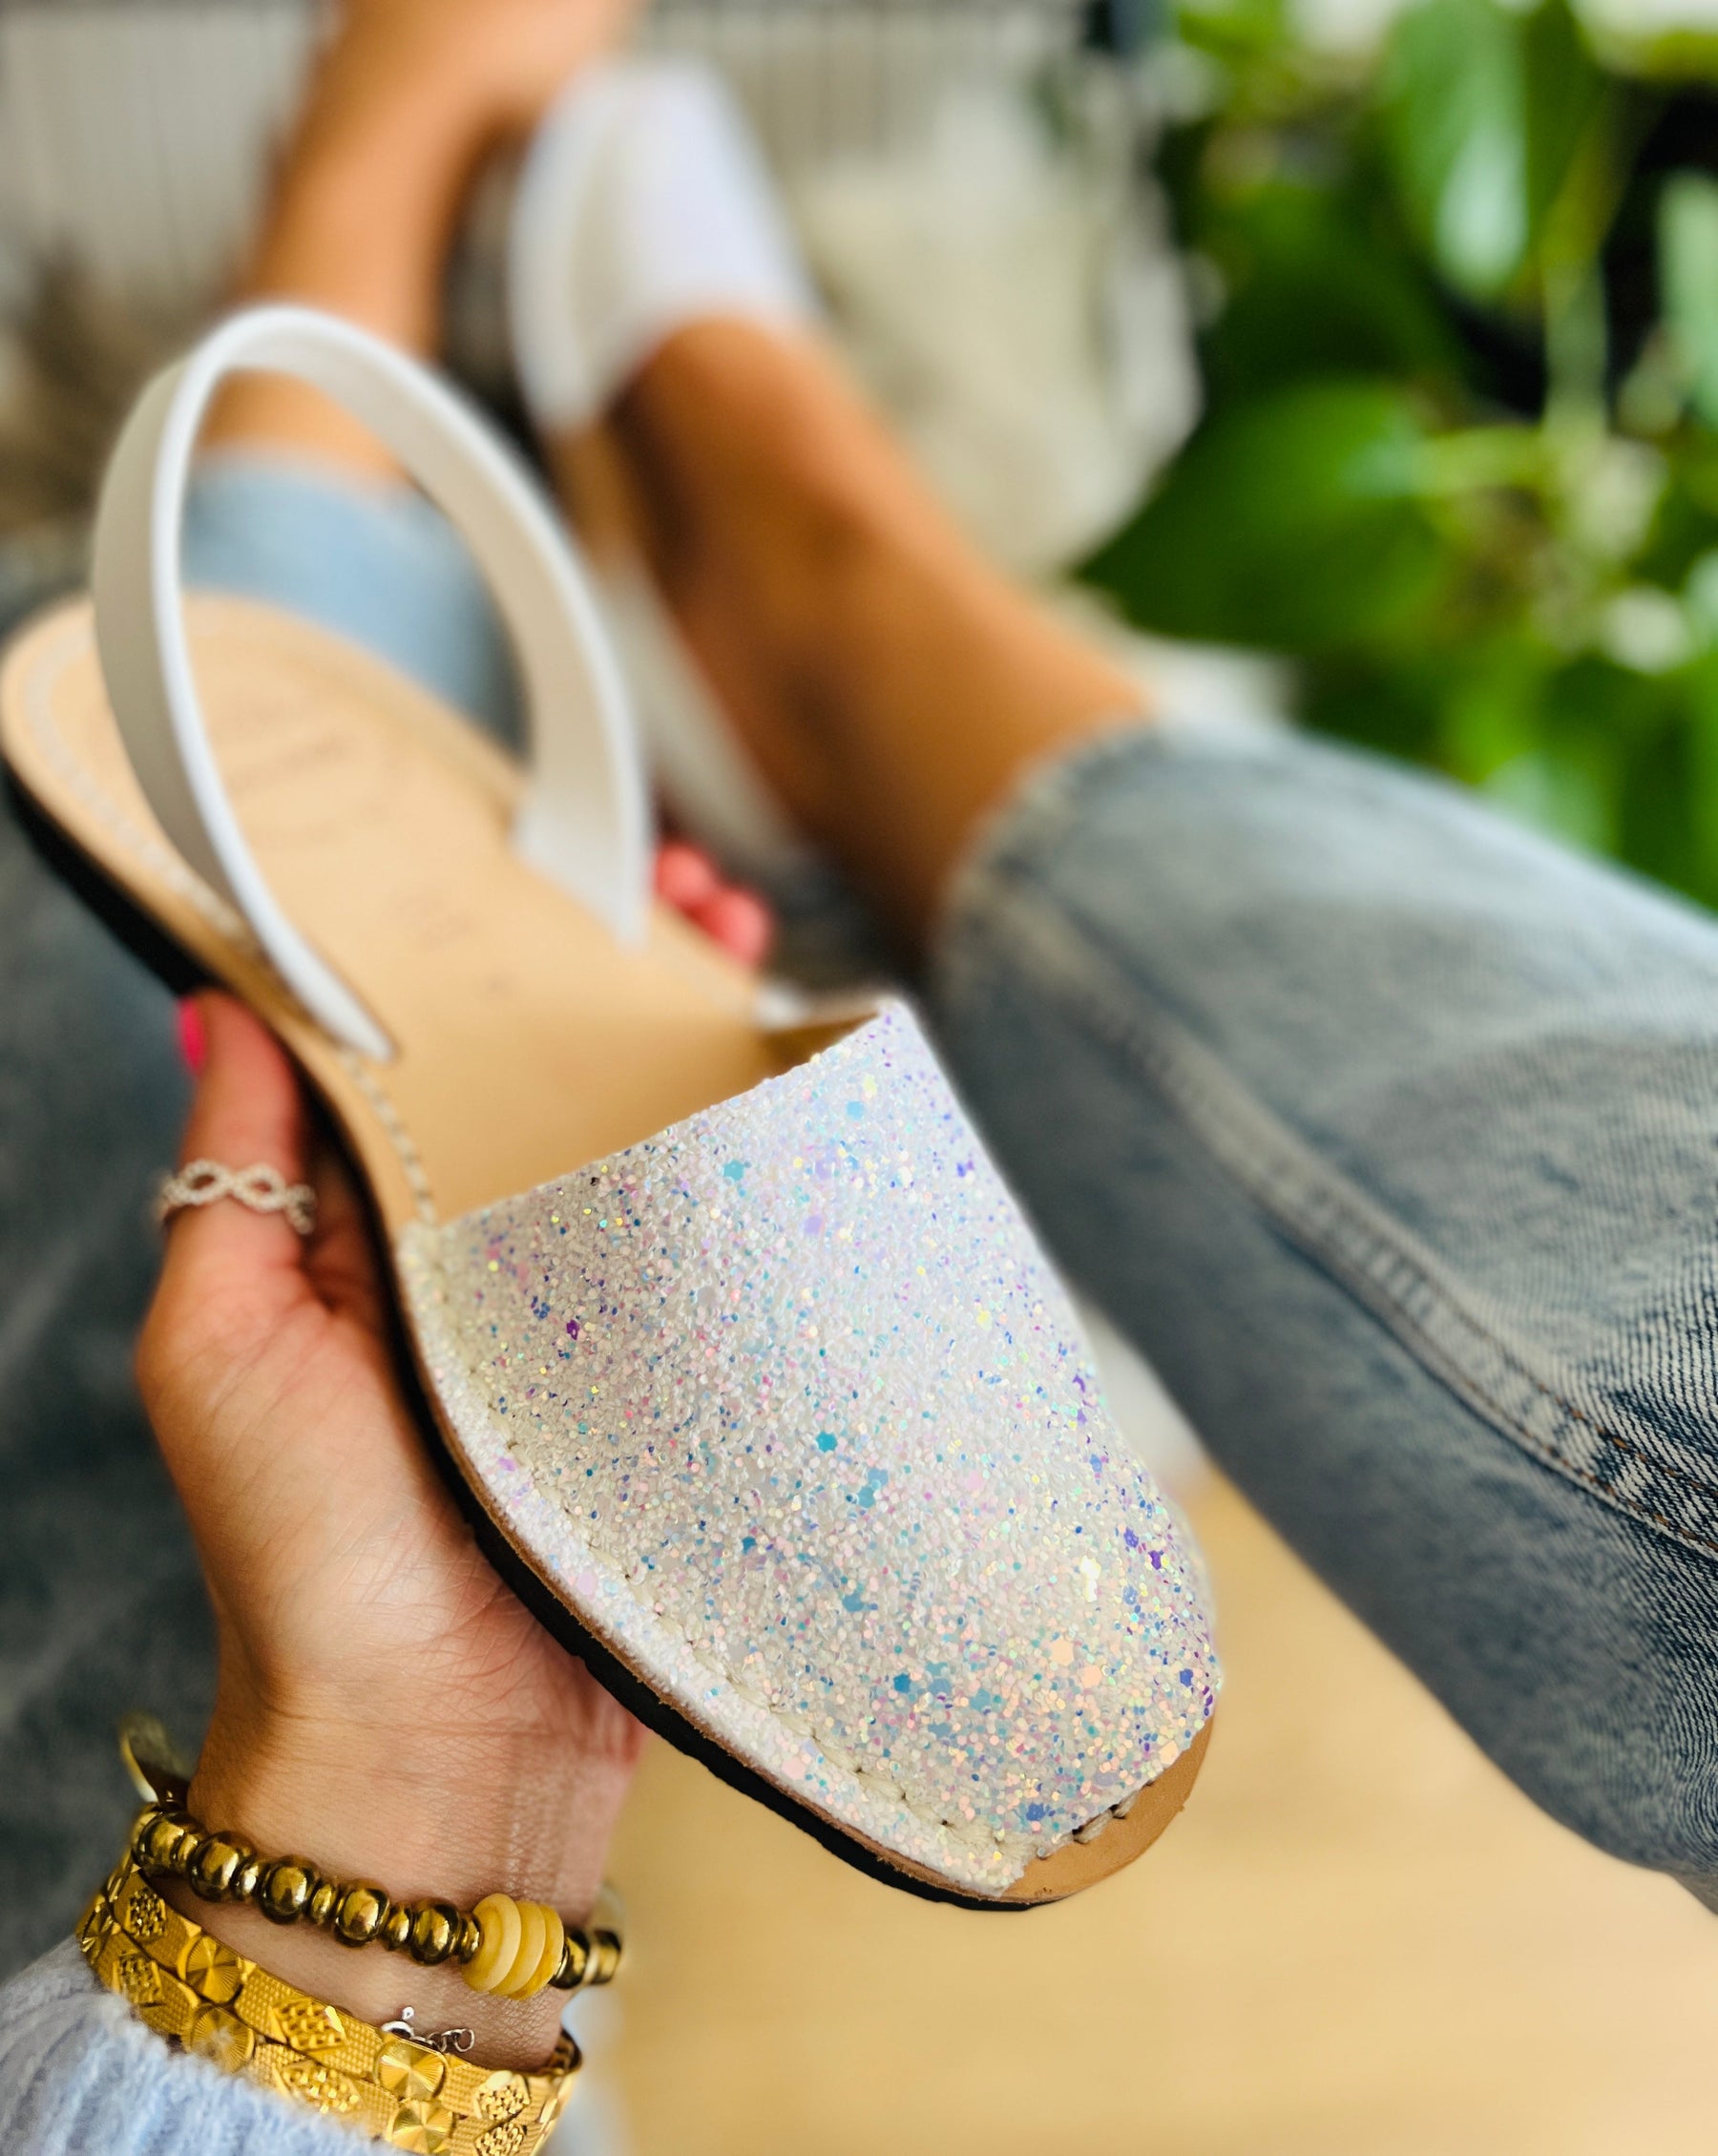 Irridescent white glitter uppers on a traditional menorcan avarca sandal with white leather slingback heel strap and flexible rubber sole